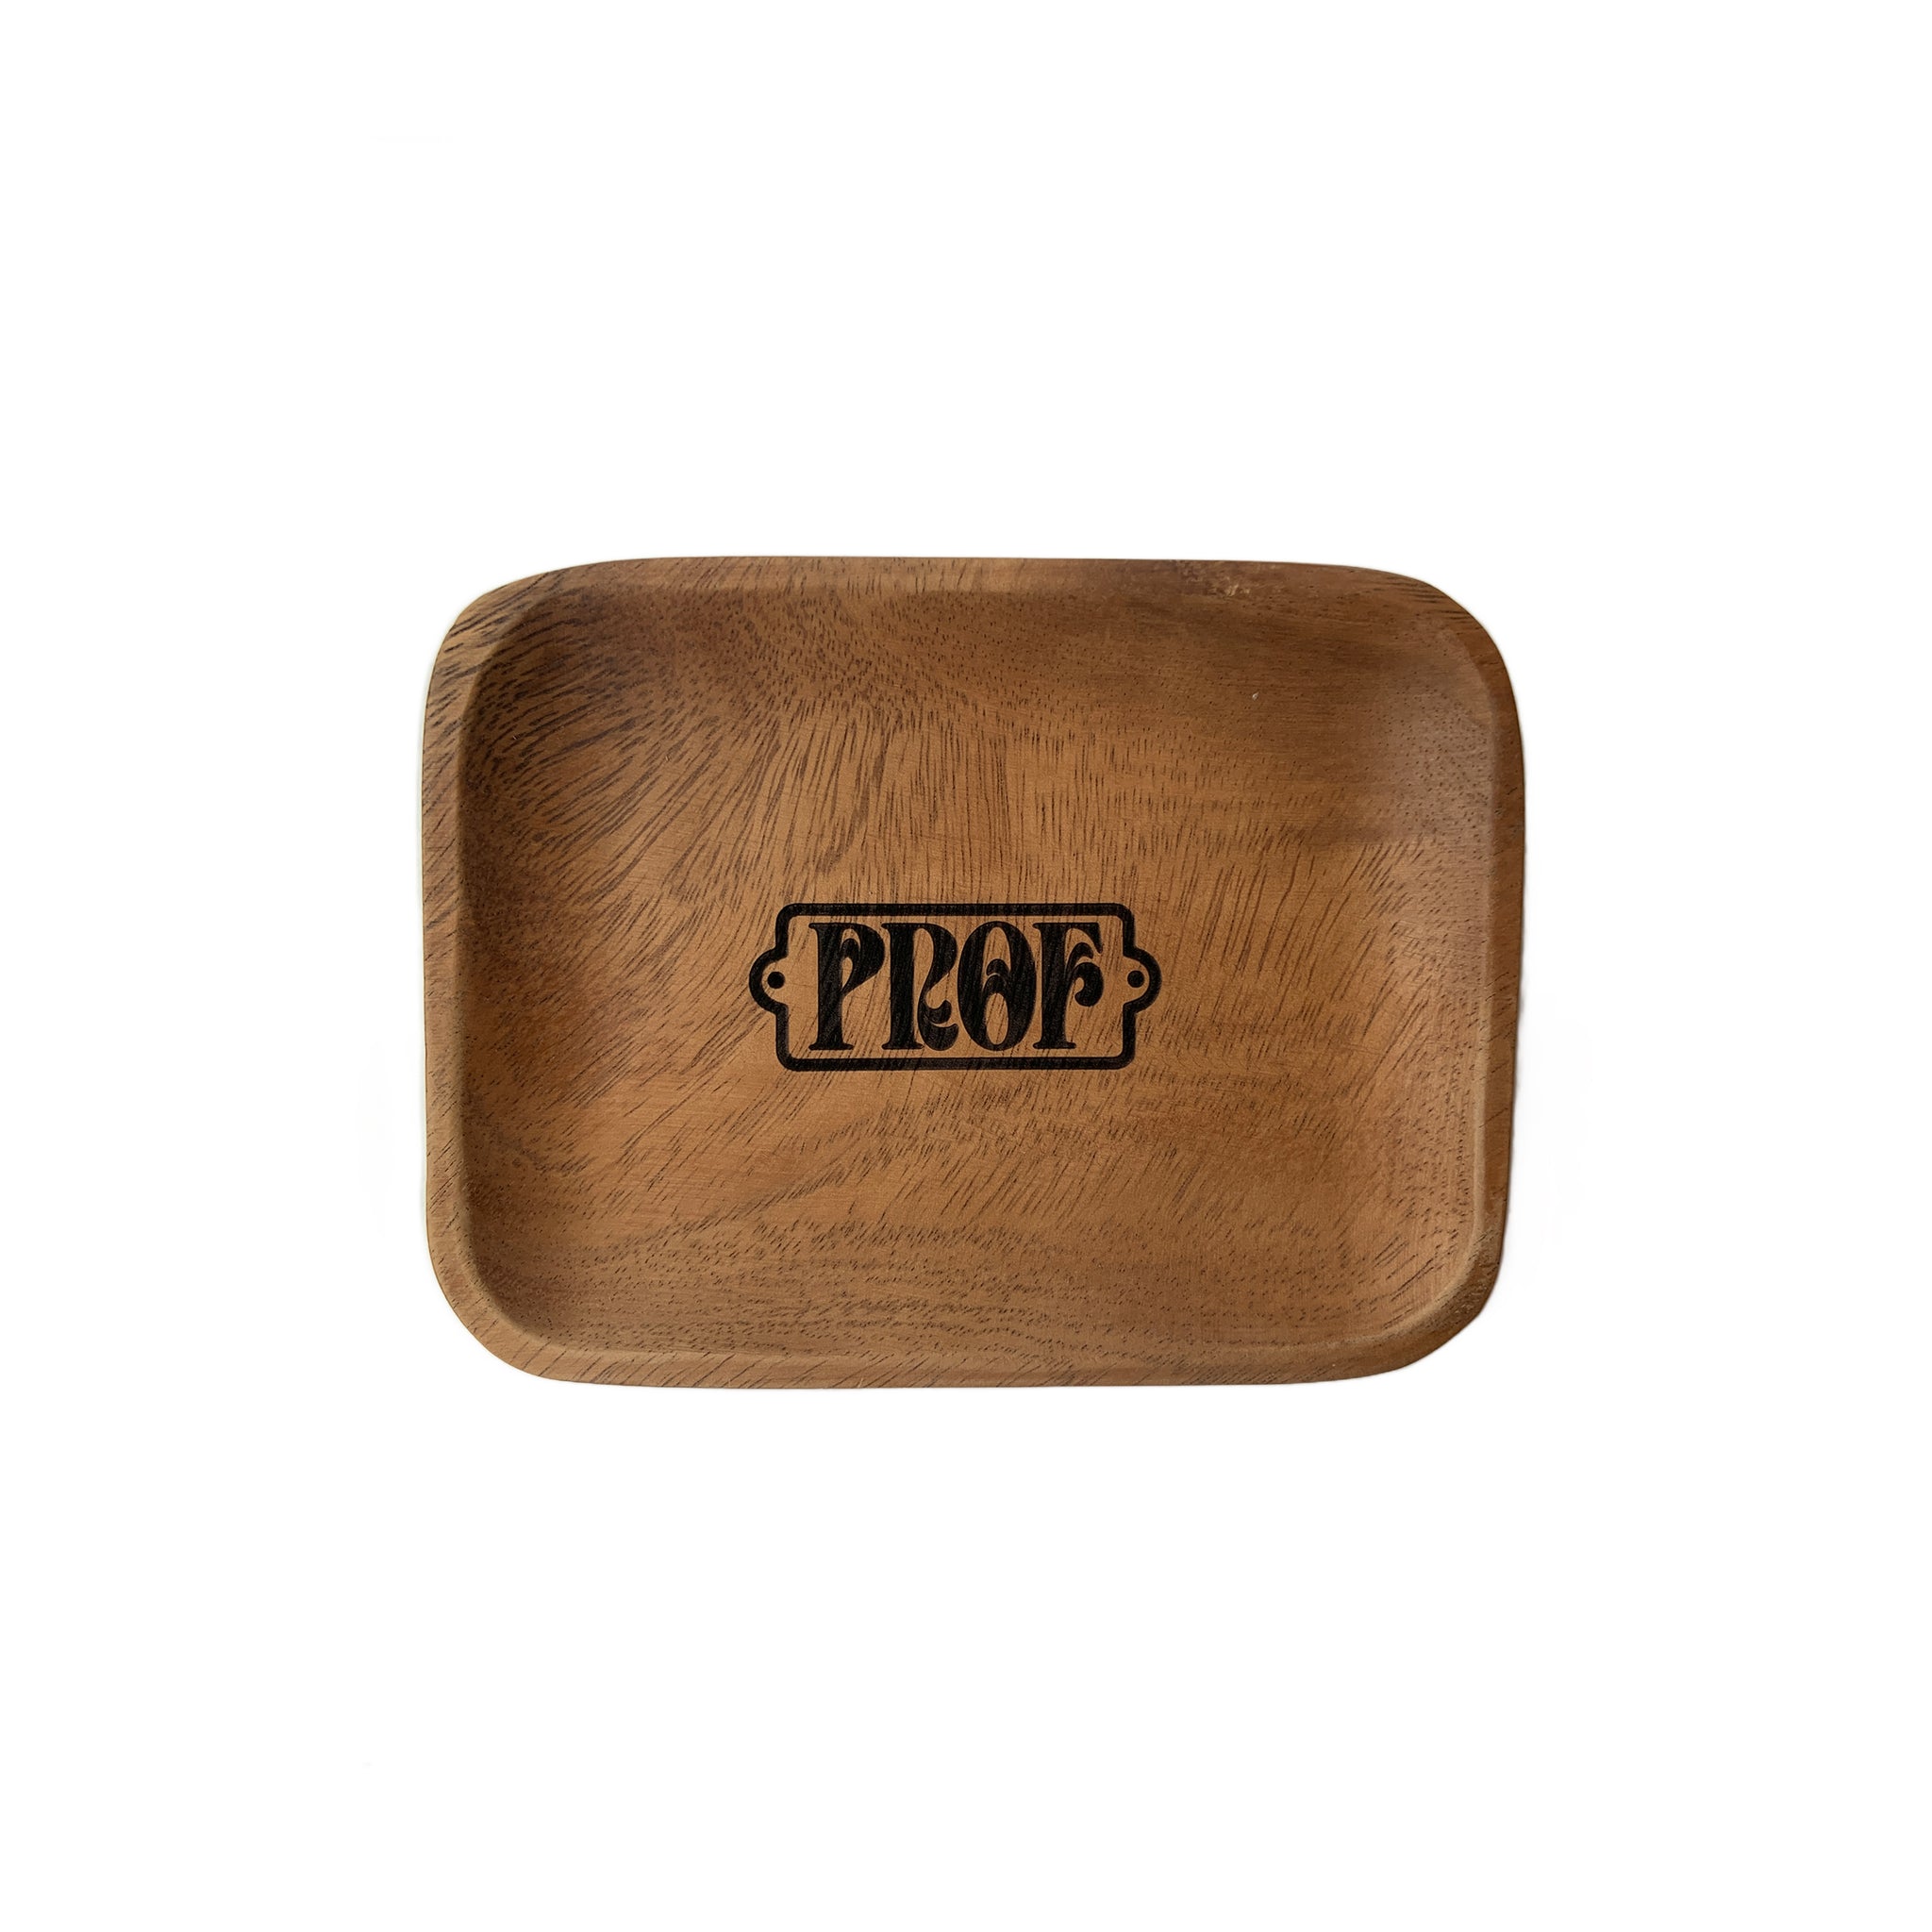 PROF "Nametag" Wooden Tray